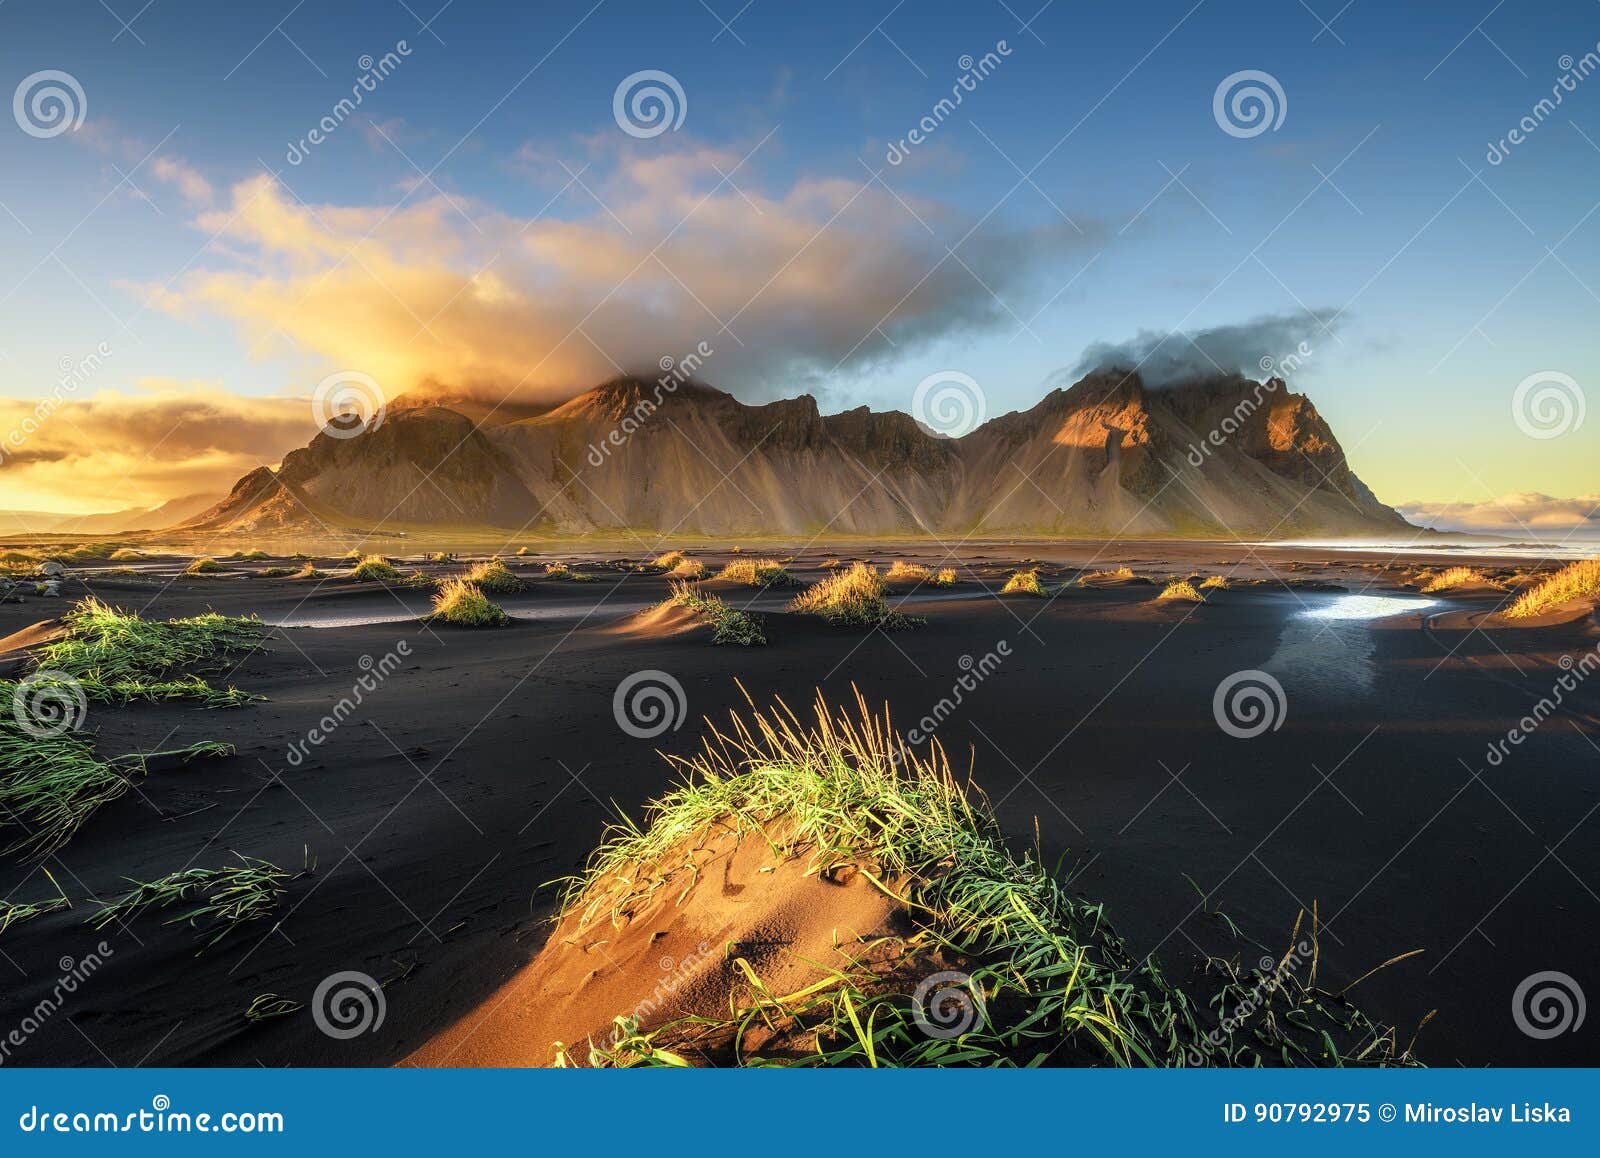 sunset above vestrahorn and its black sand beach in iceland